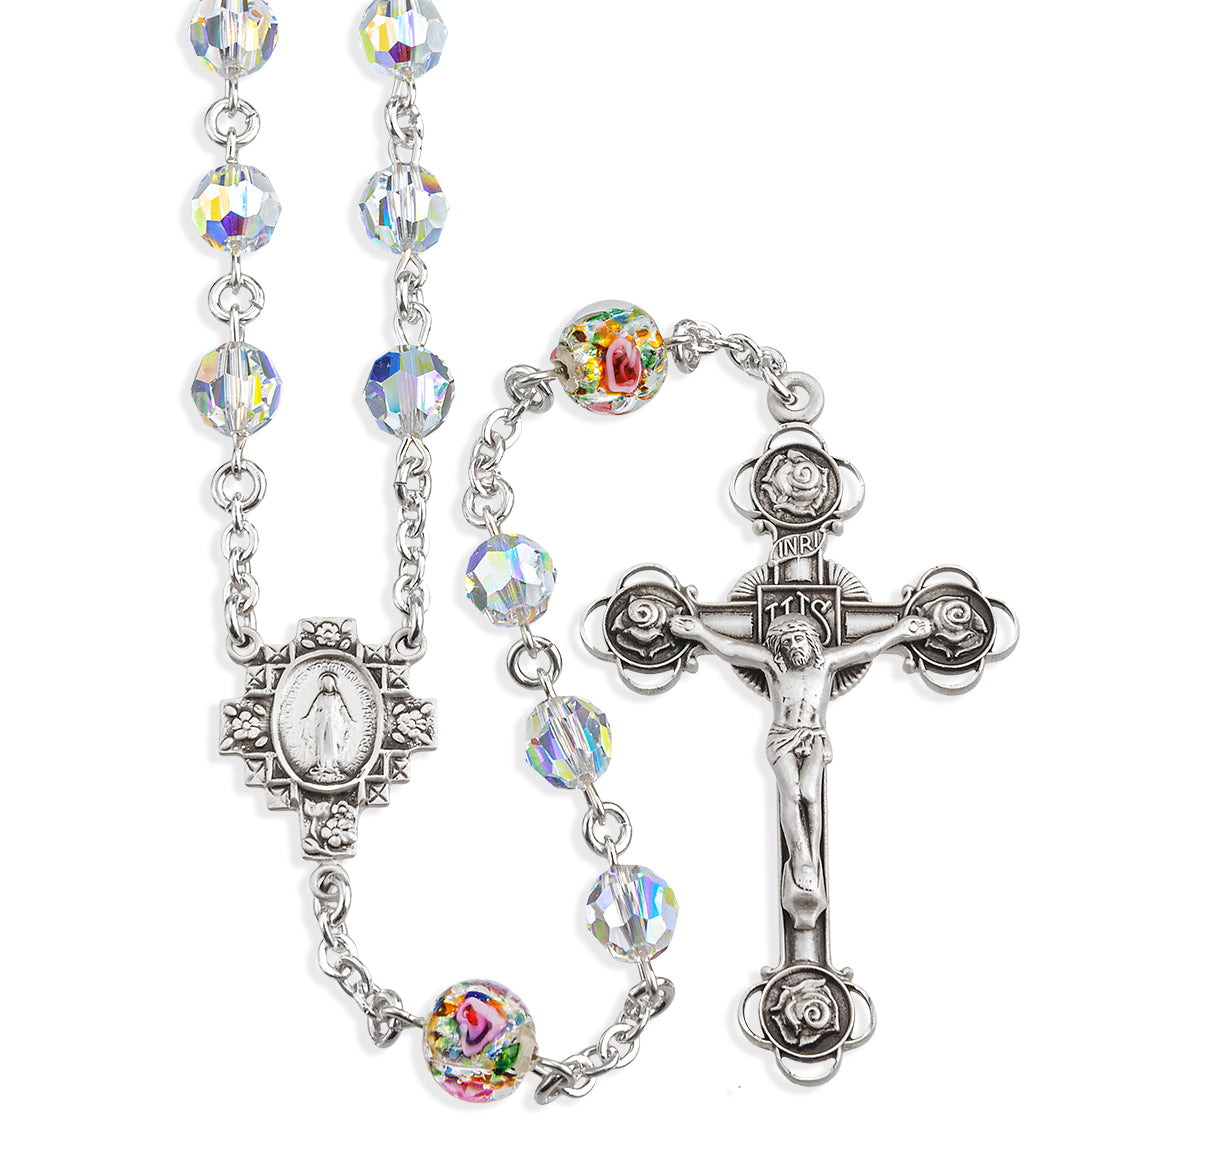 Sterling Silver Rosary Hand Made with Swarovski Crystal 7mm Round Aurora Borealis and 8mm Venetian Glass Beads by HMH